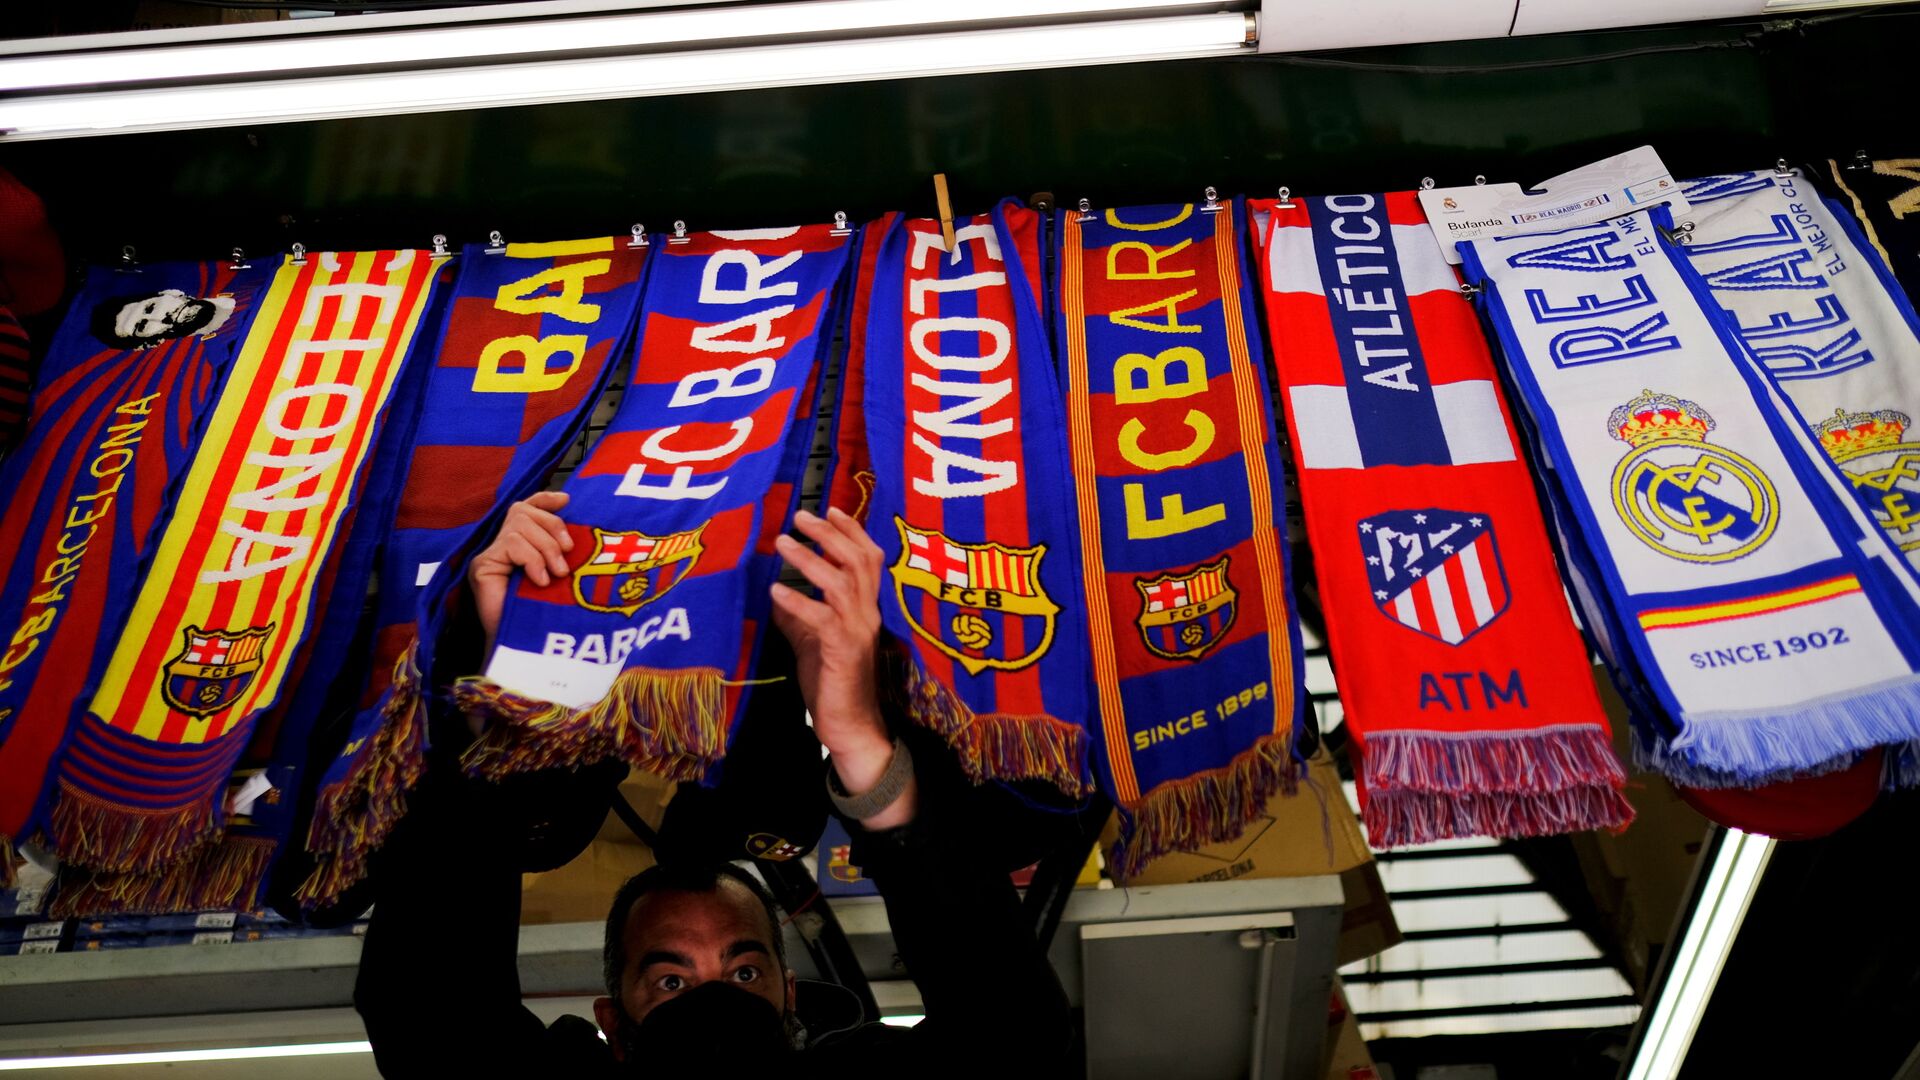 Soccer Football - FC Barcelona, Atletico Madrid and Real Madrid scarves are displayed inside a store at Las Ramblas as twelve of Europe's top football clubs launch a breakaway Super League - Barcelona, Spain - April 19, 2021 - اسپوتنیک افغانستان  , 1920, 20.07.2022